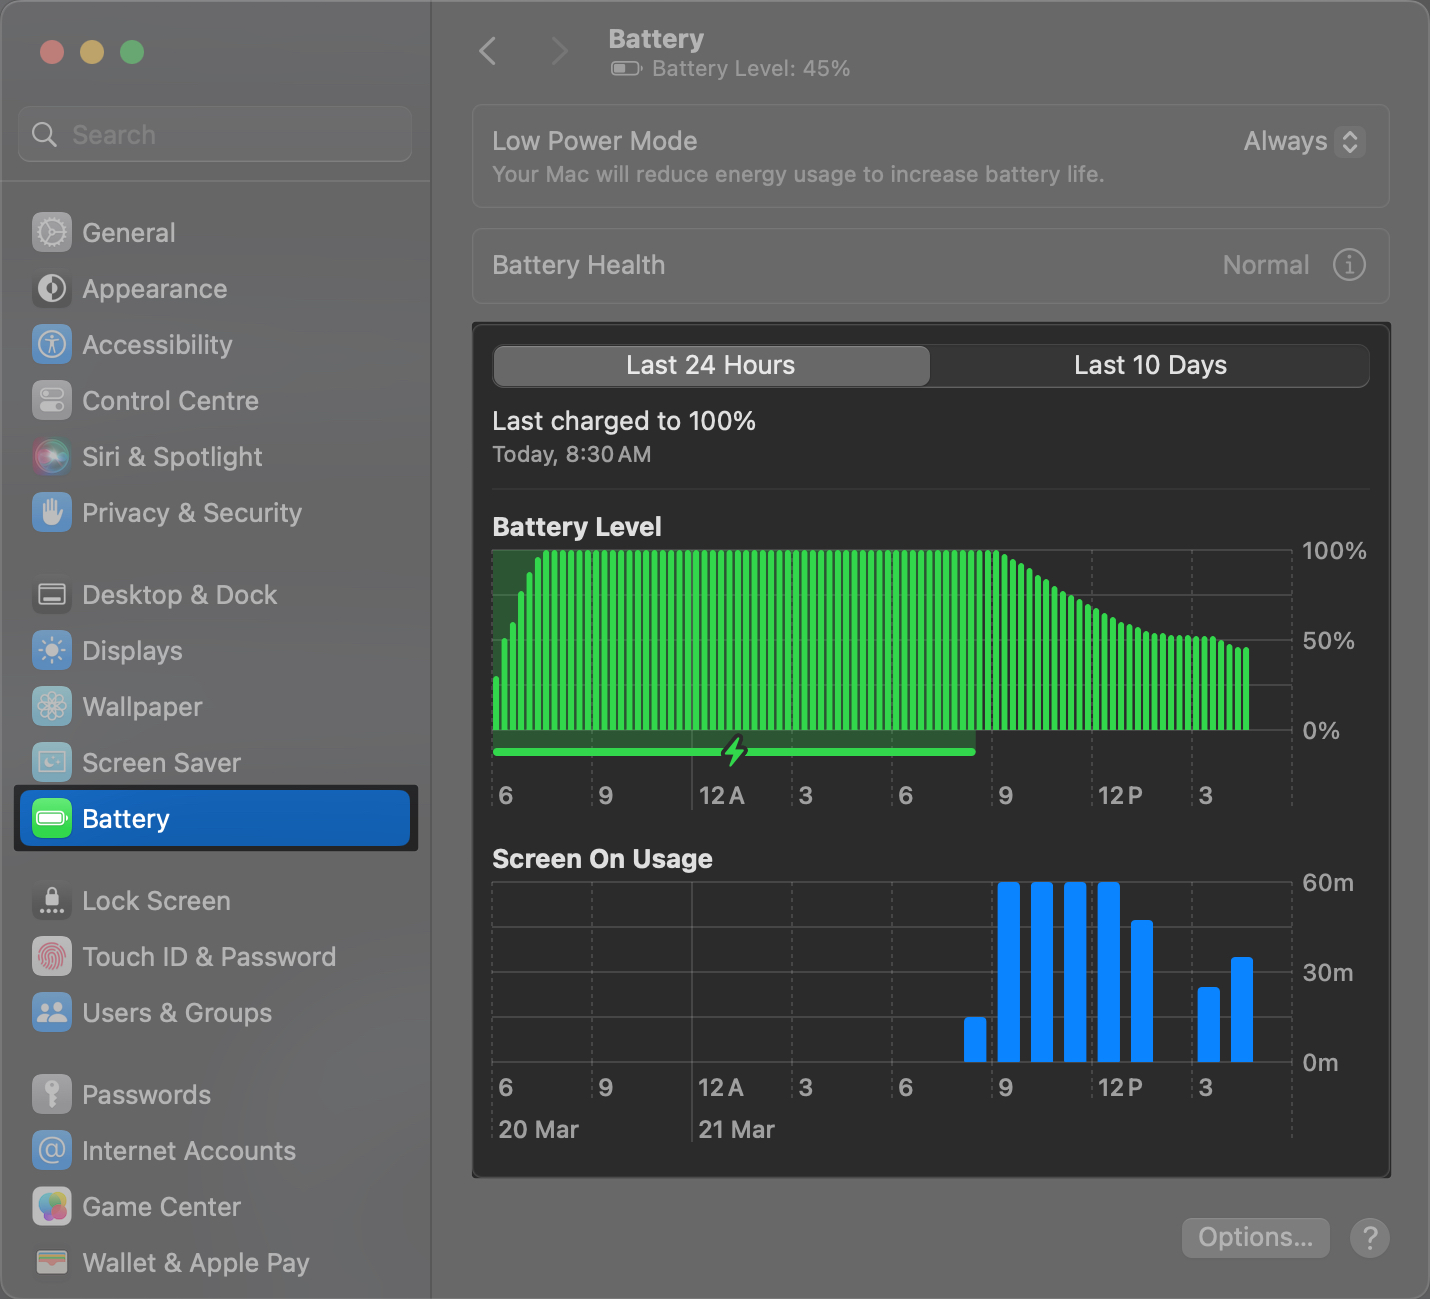 Select Battery and view the battery usage graph on Mac